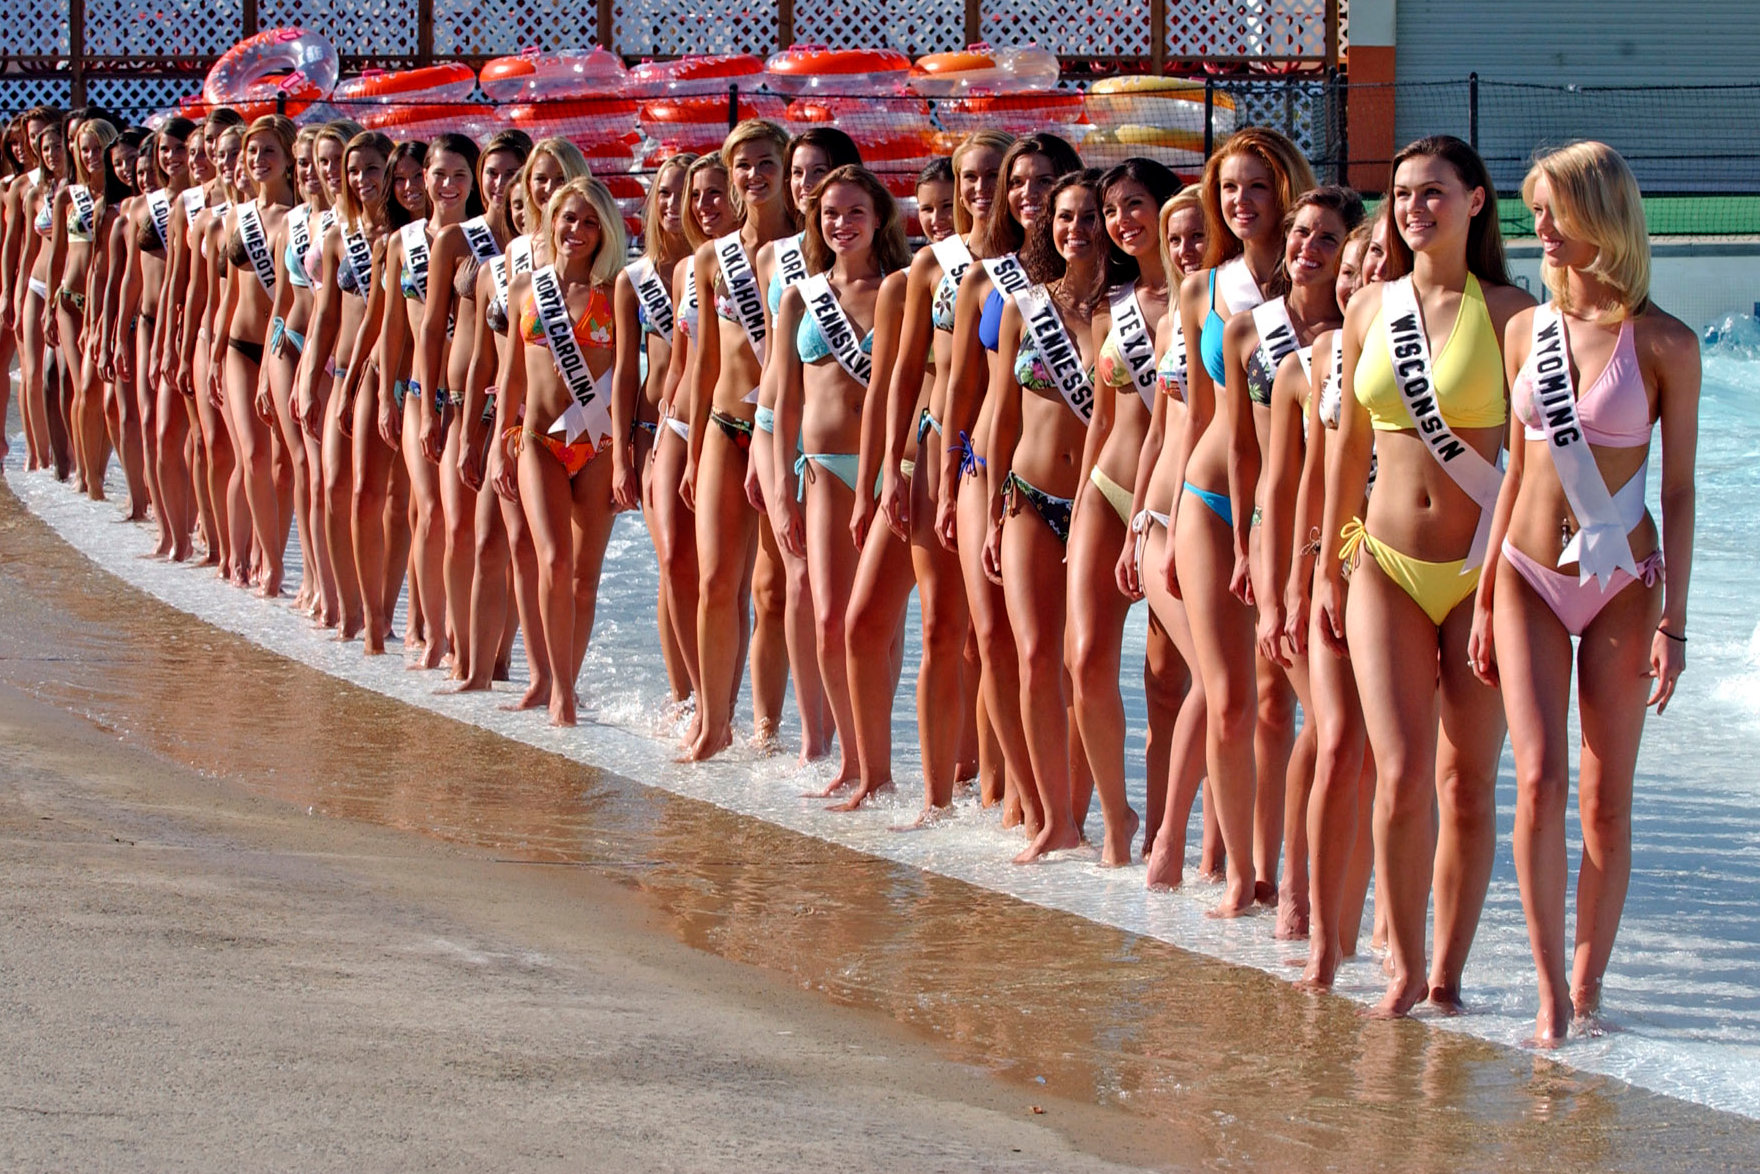 diane mcaleer recommends Teen Nude Beauty Pageants